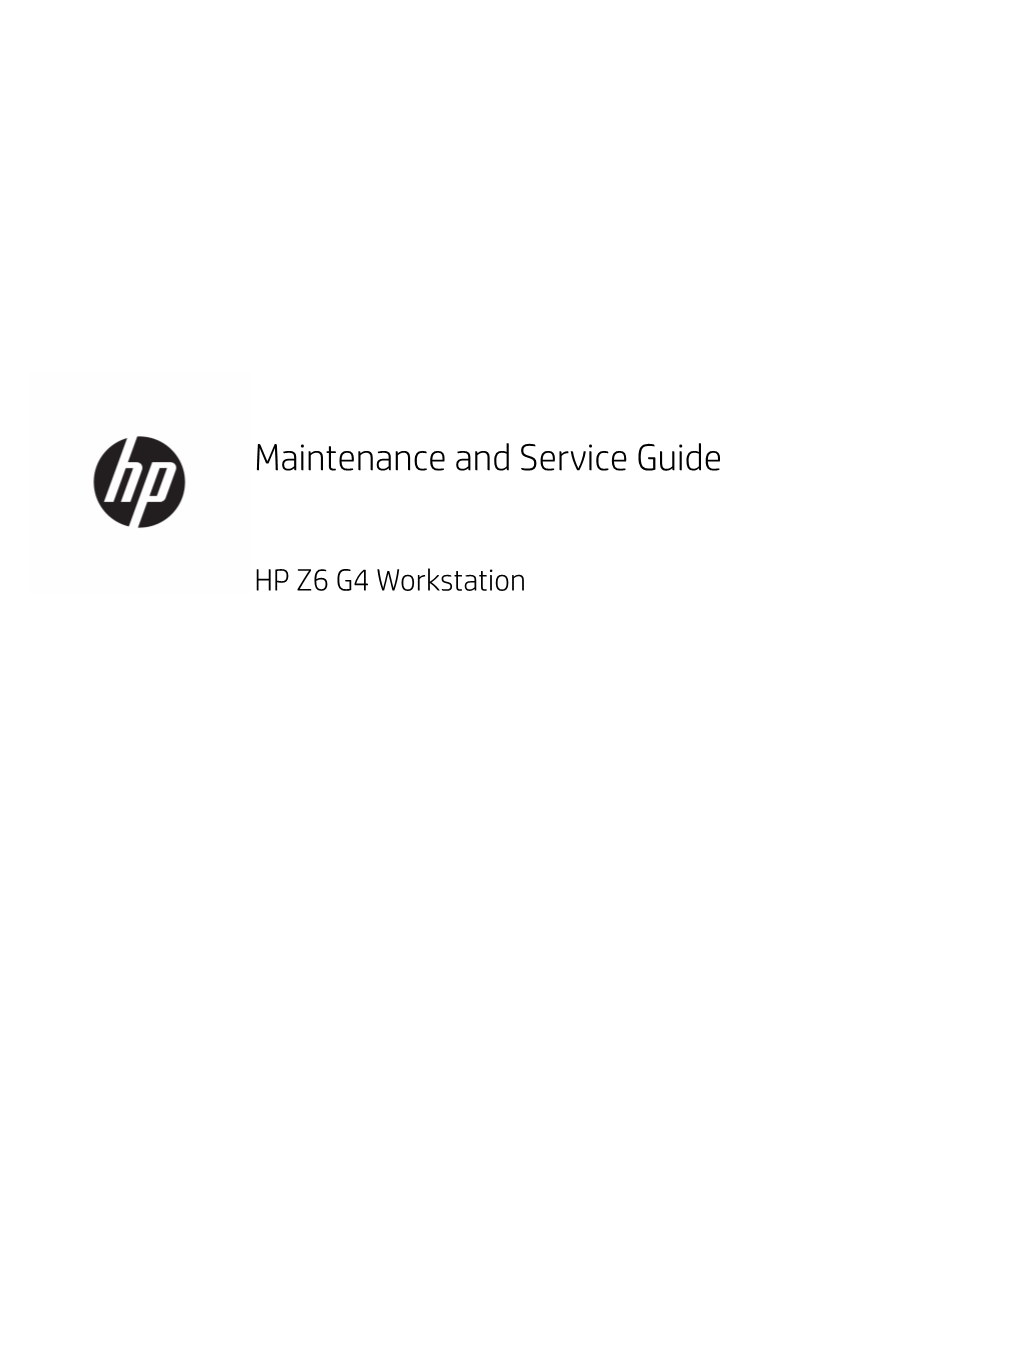 Maintenance and Service Guide HP Z6 G4 Workstation